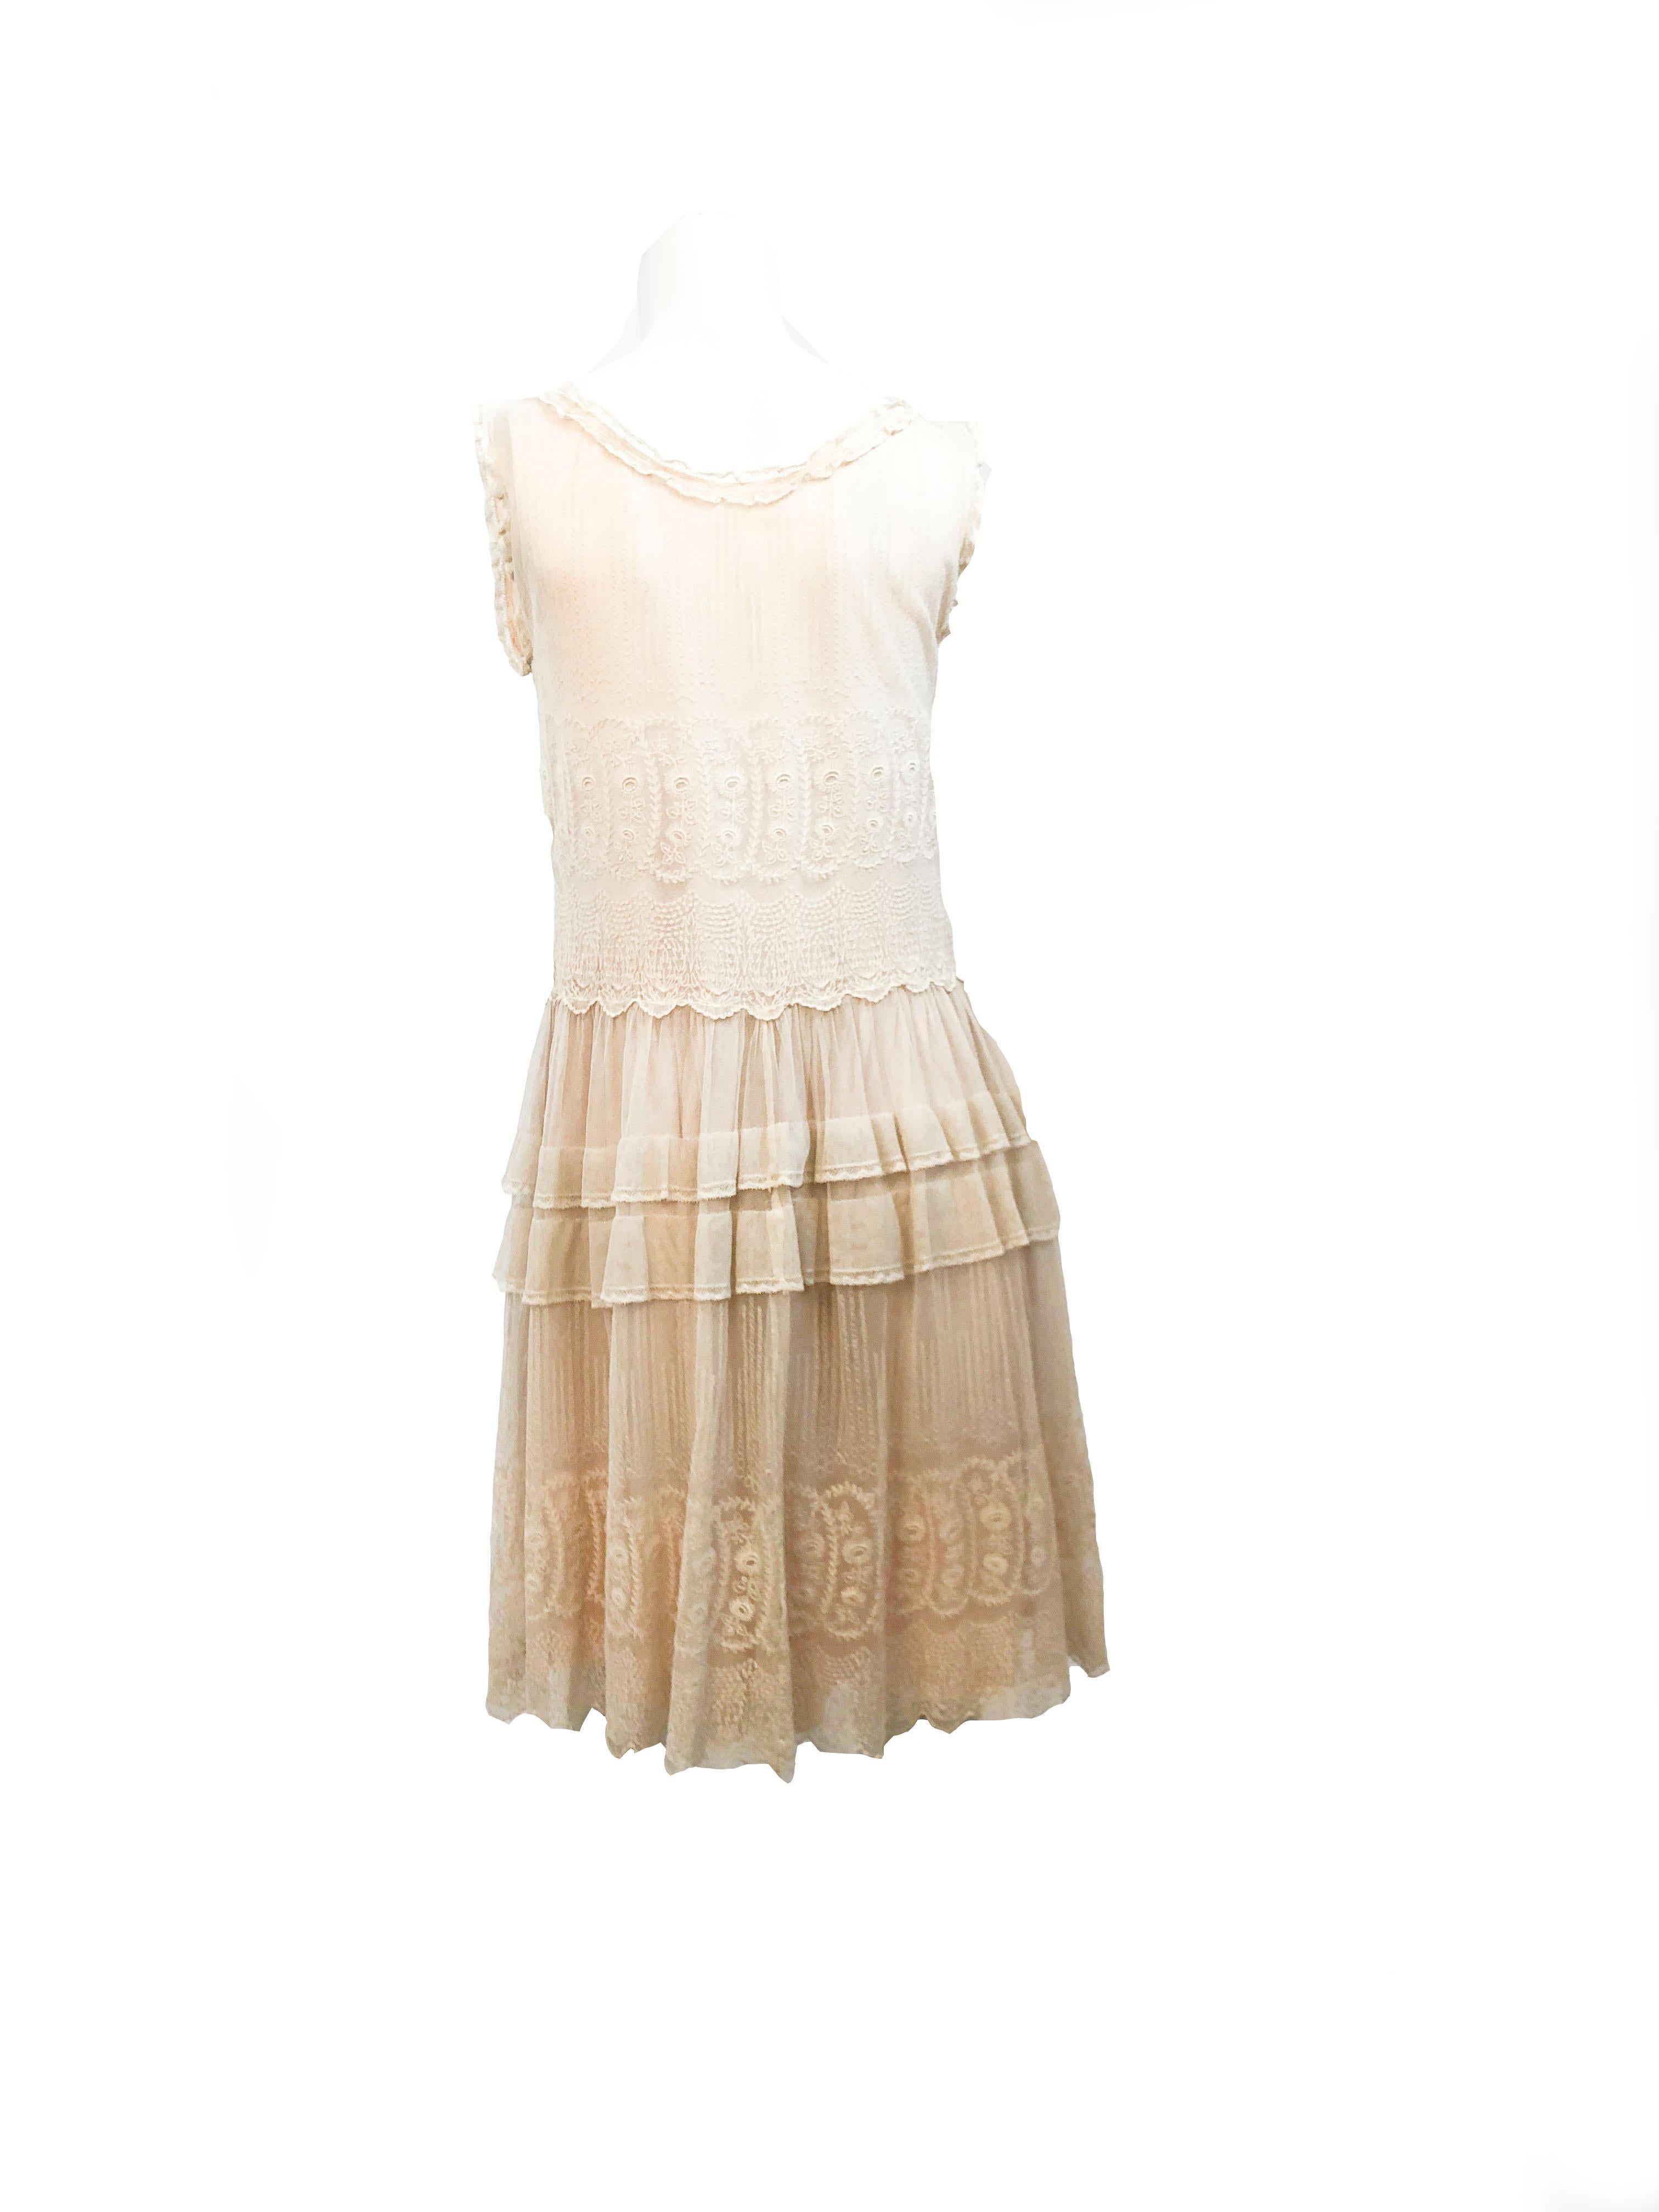 Beige 1920s Lace Drop-Waist Dress with Soft Rose Lining For Sale